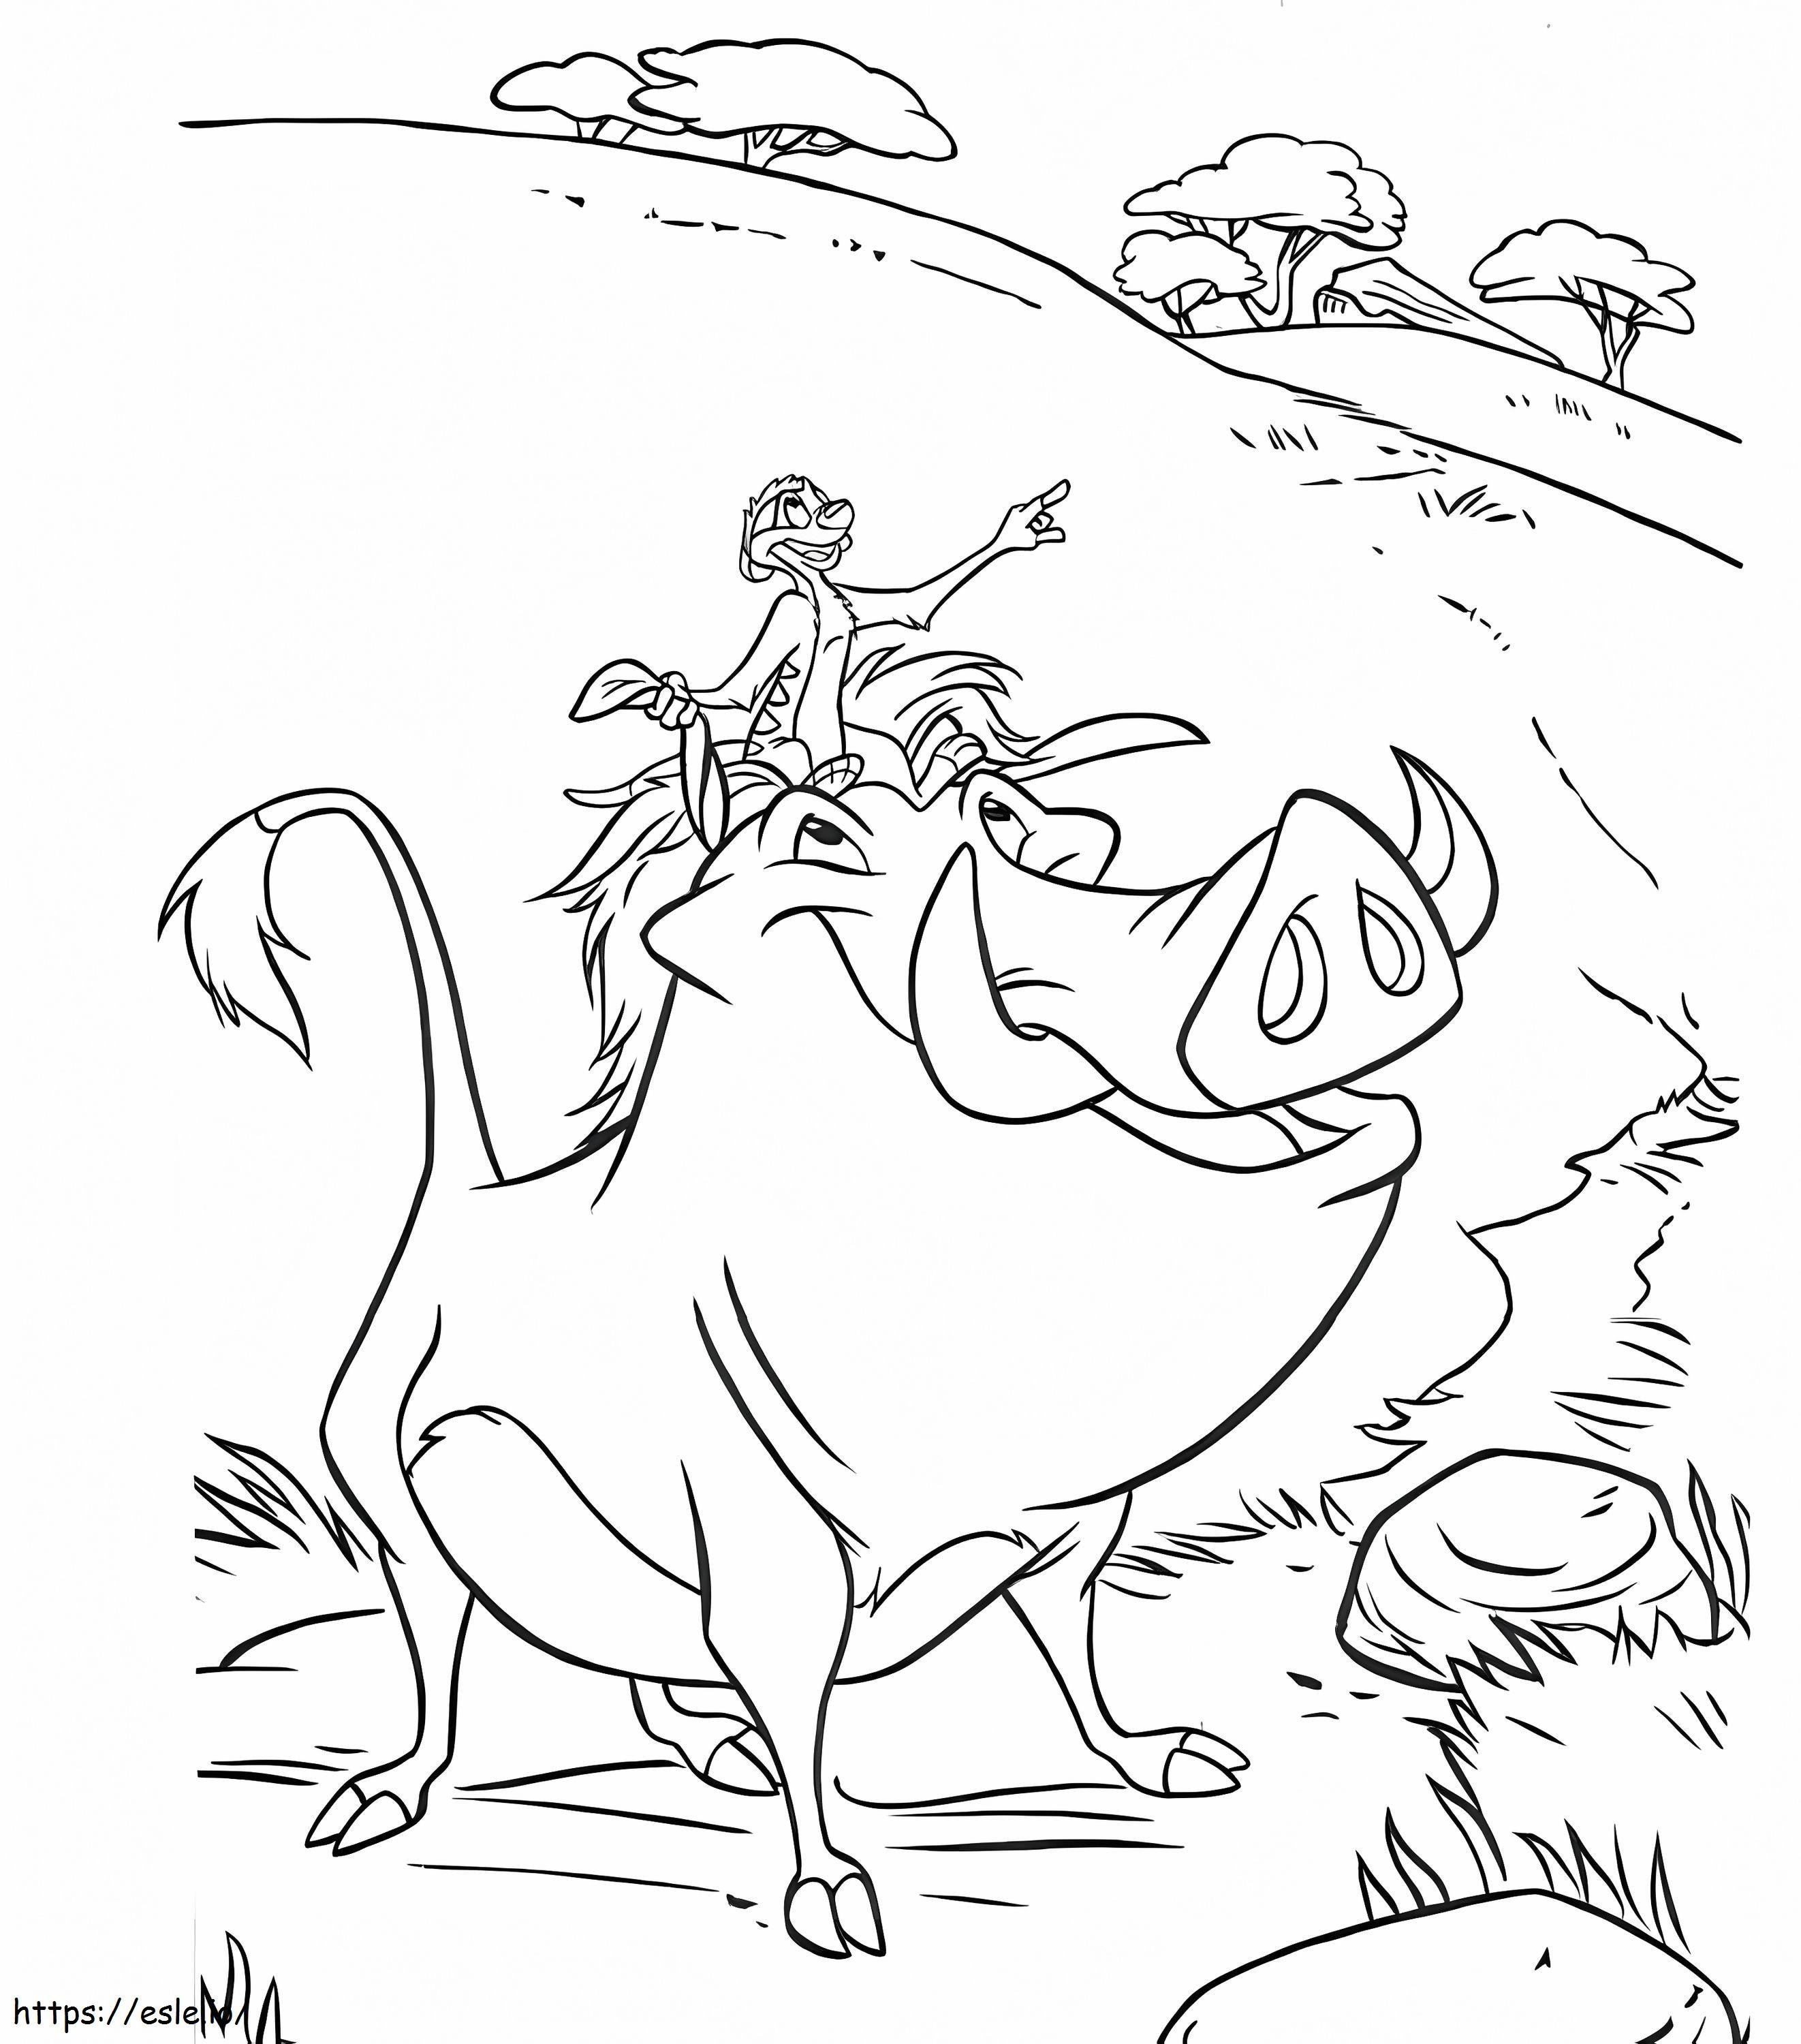 Timon Is Pumbaa A4 coloring page